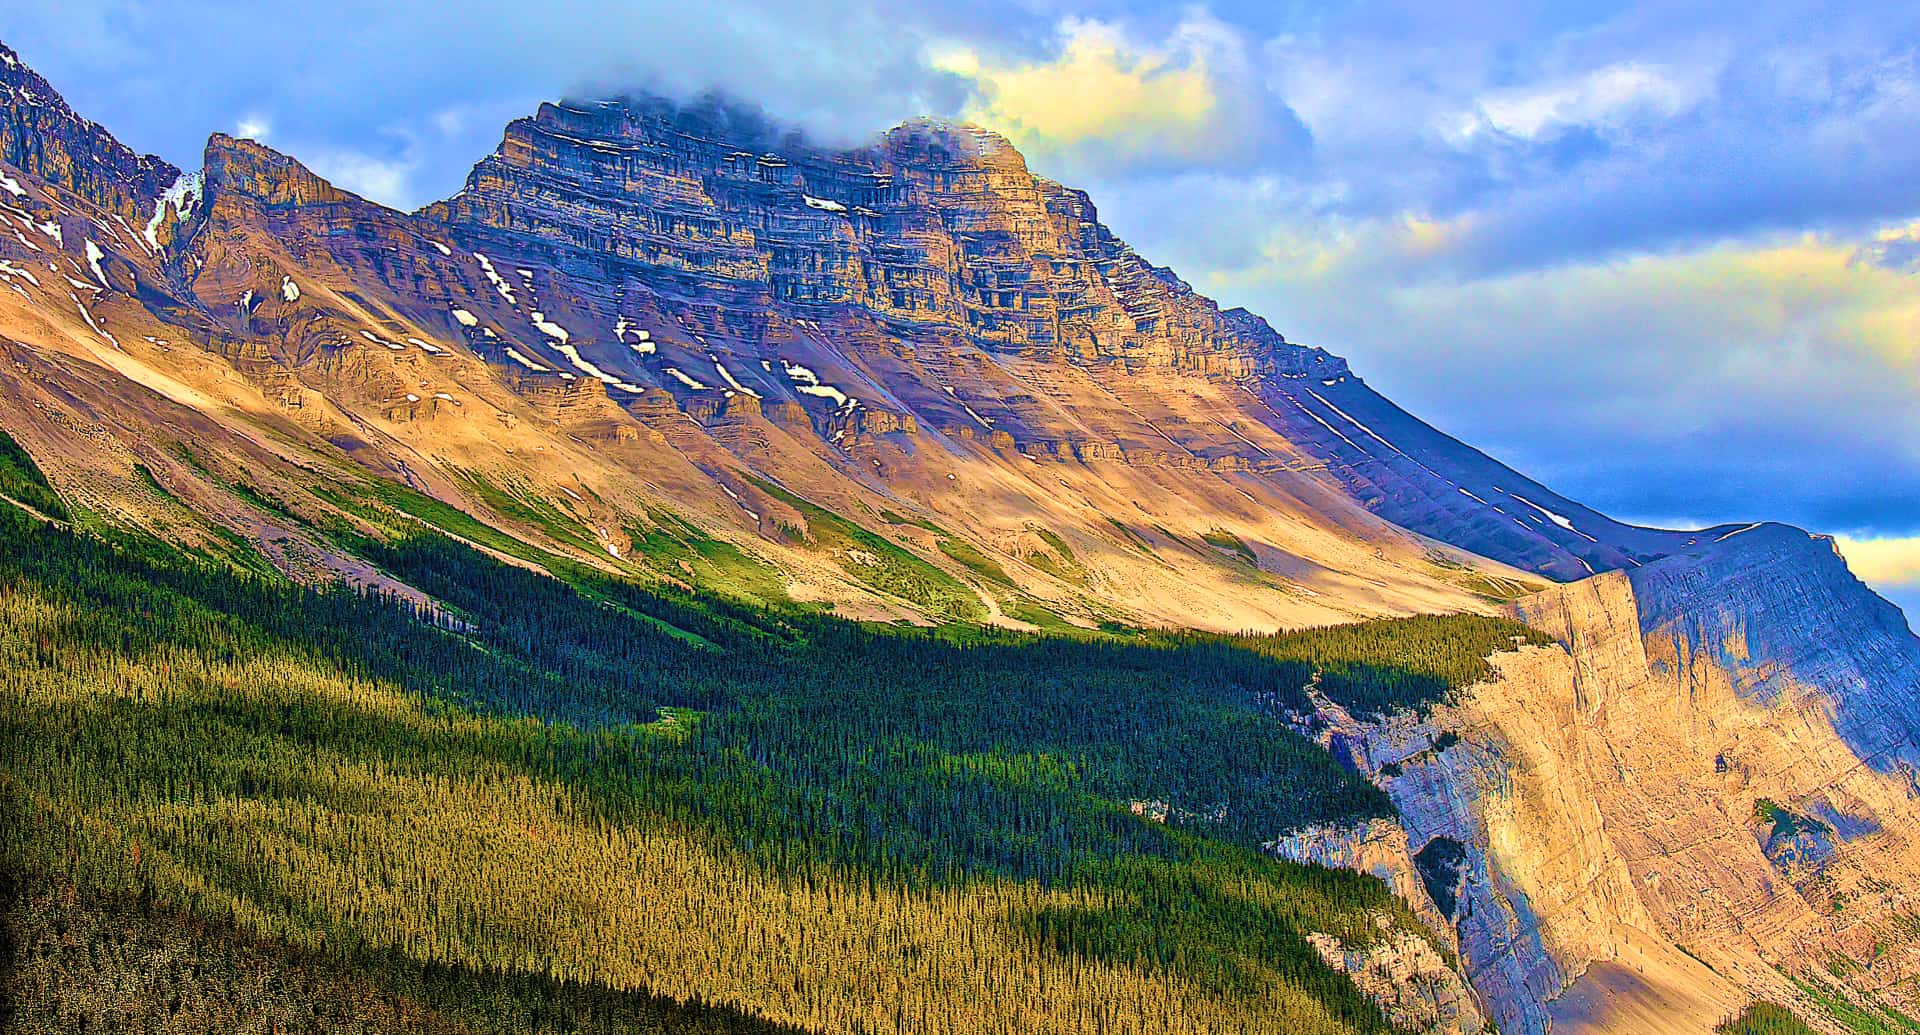 Planning to visit Banff in three days? Here you'll find the ultimate Banff three day itinerary!